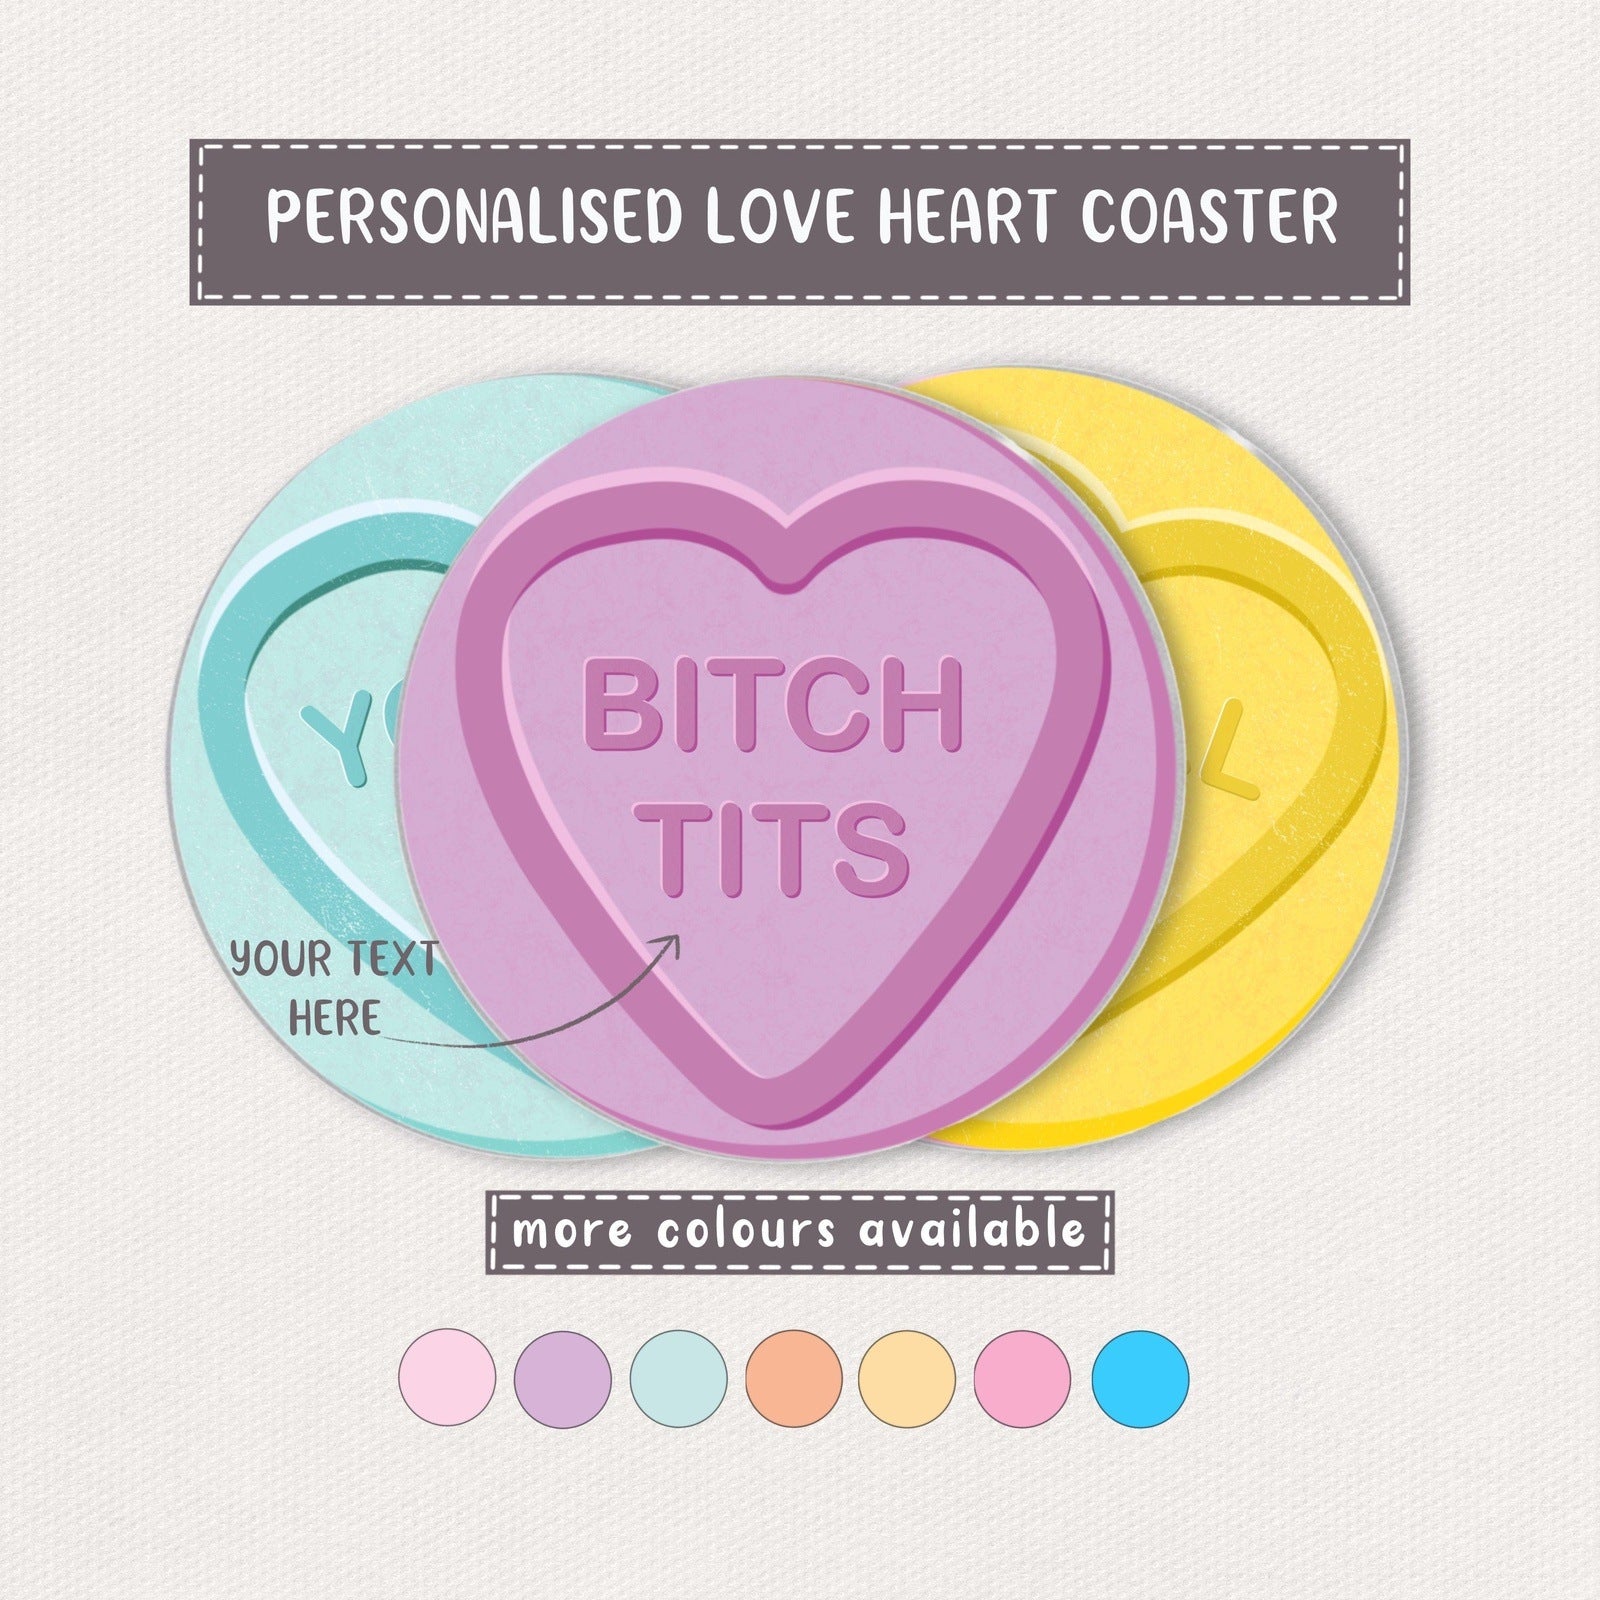 "Bitch Tits" Personalised Love Heart Coaster